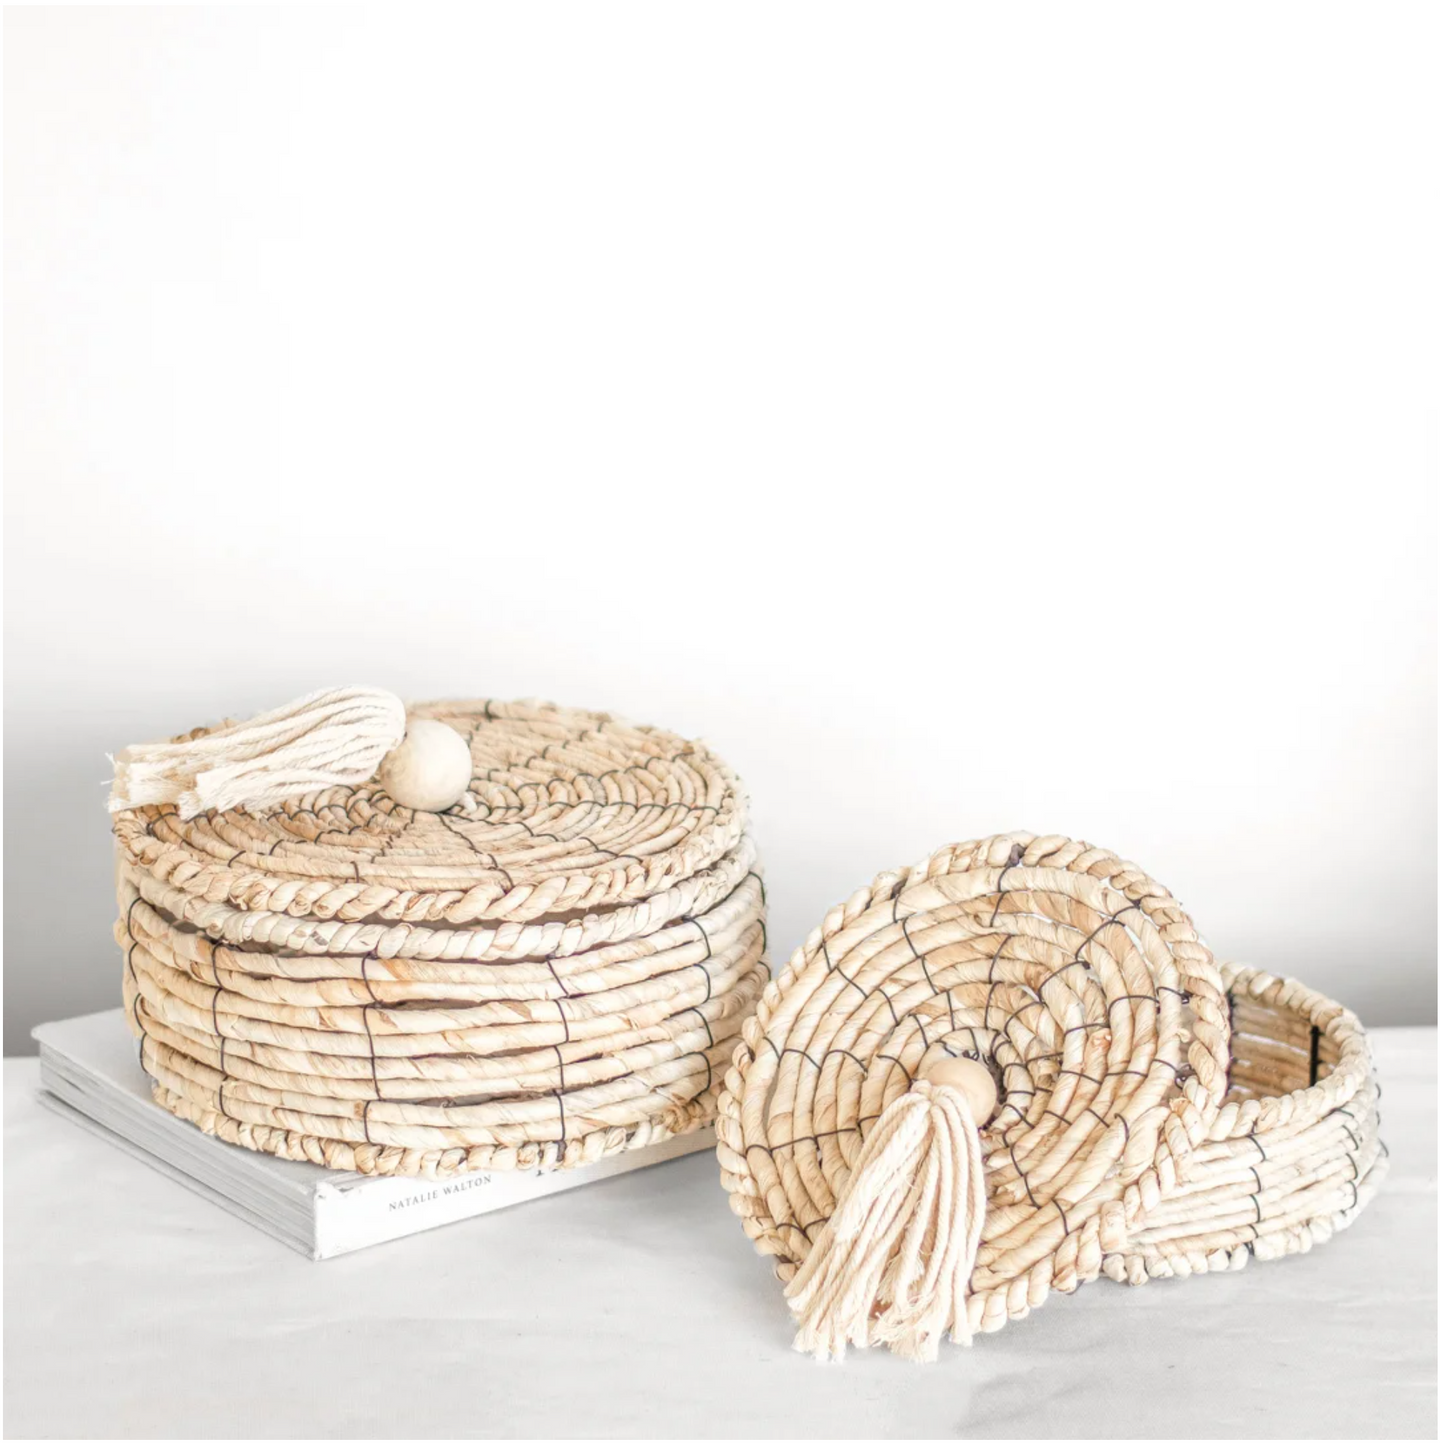 Woven Corn Basket with Lid